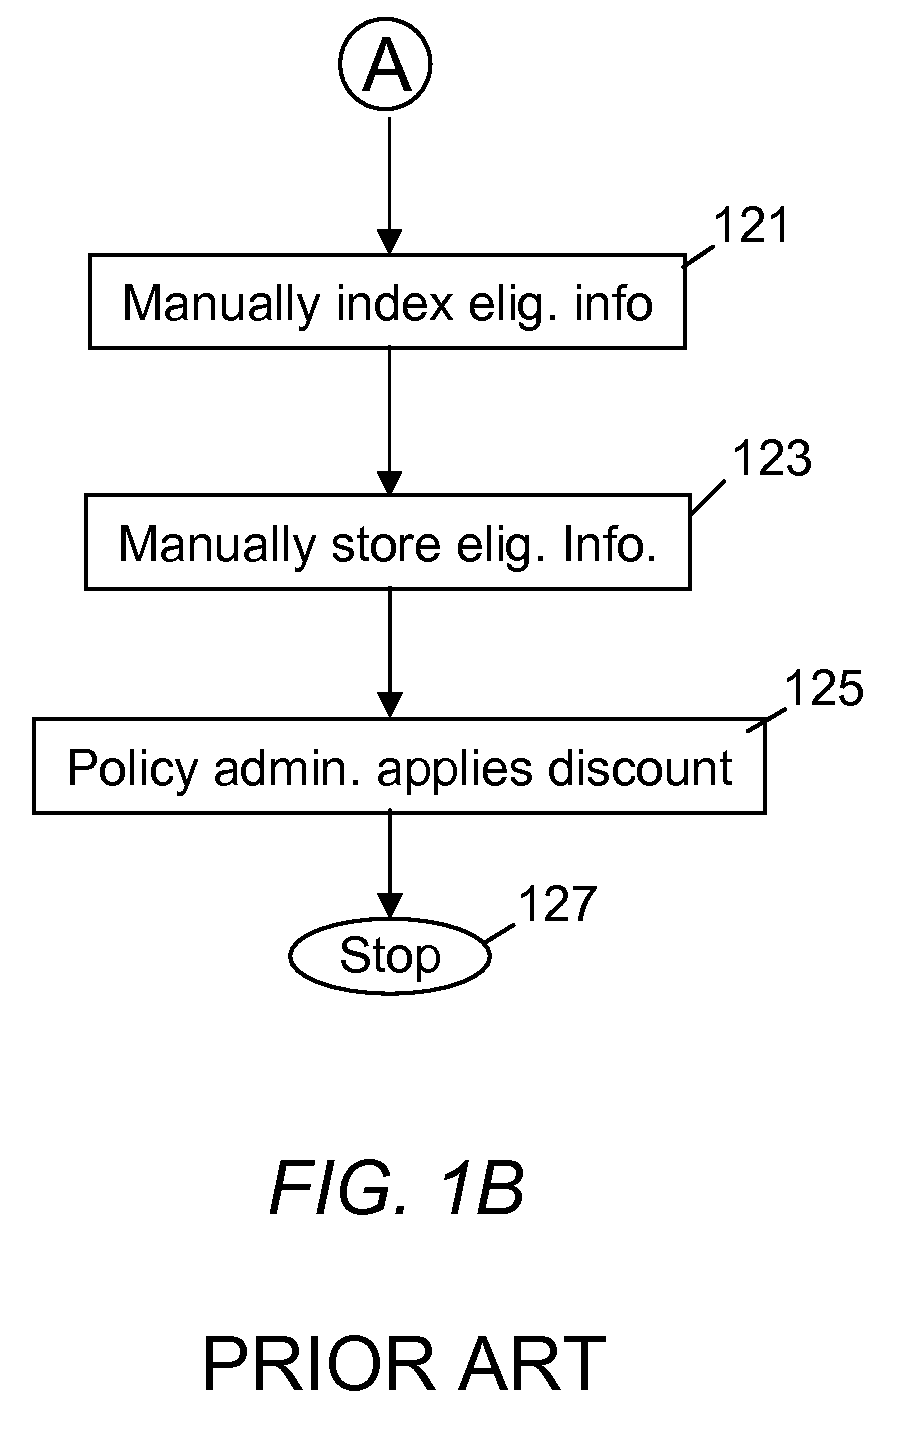 System for Electronic Application of Discounts to Insurance Policies